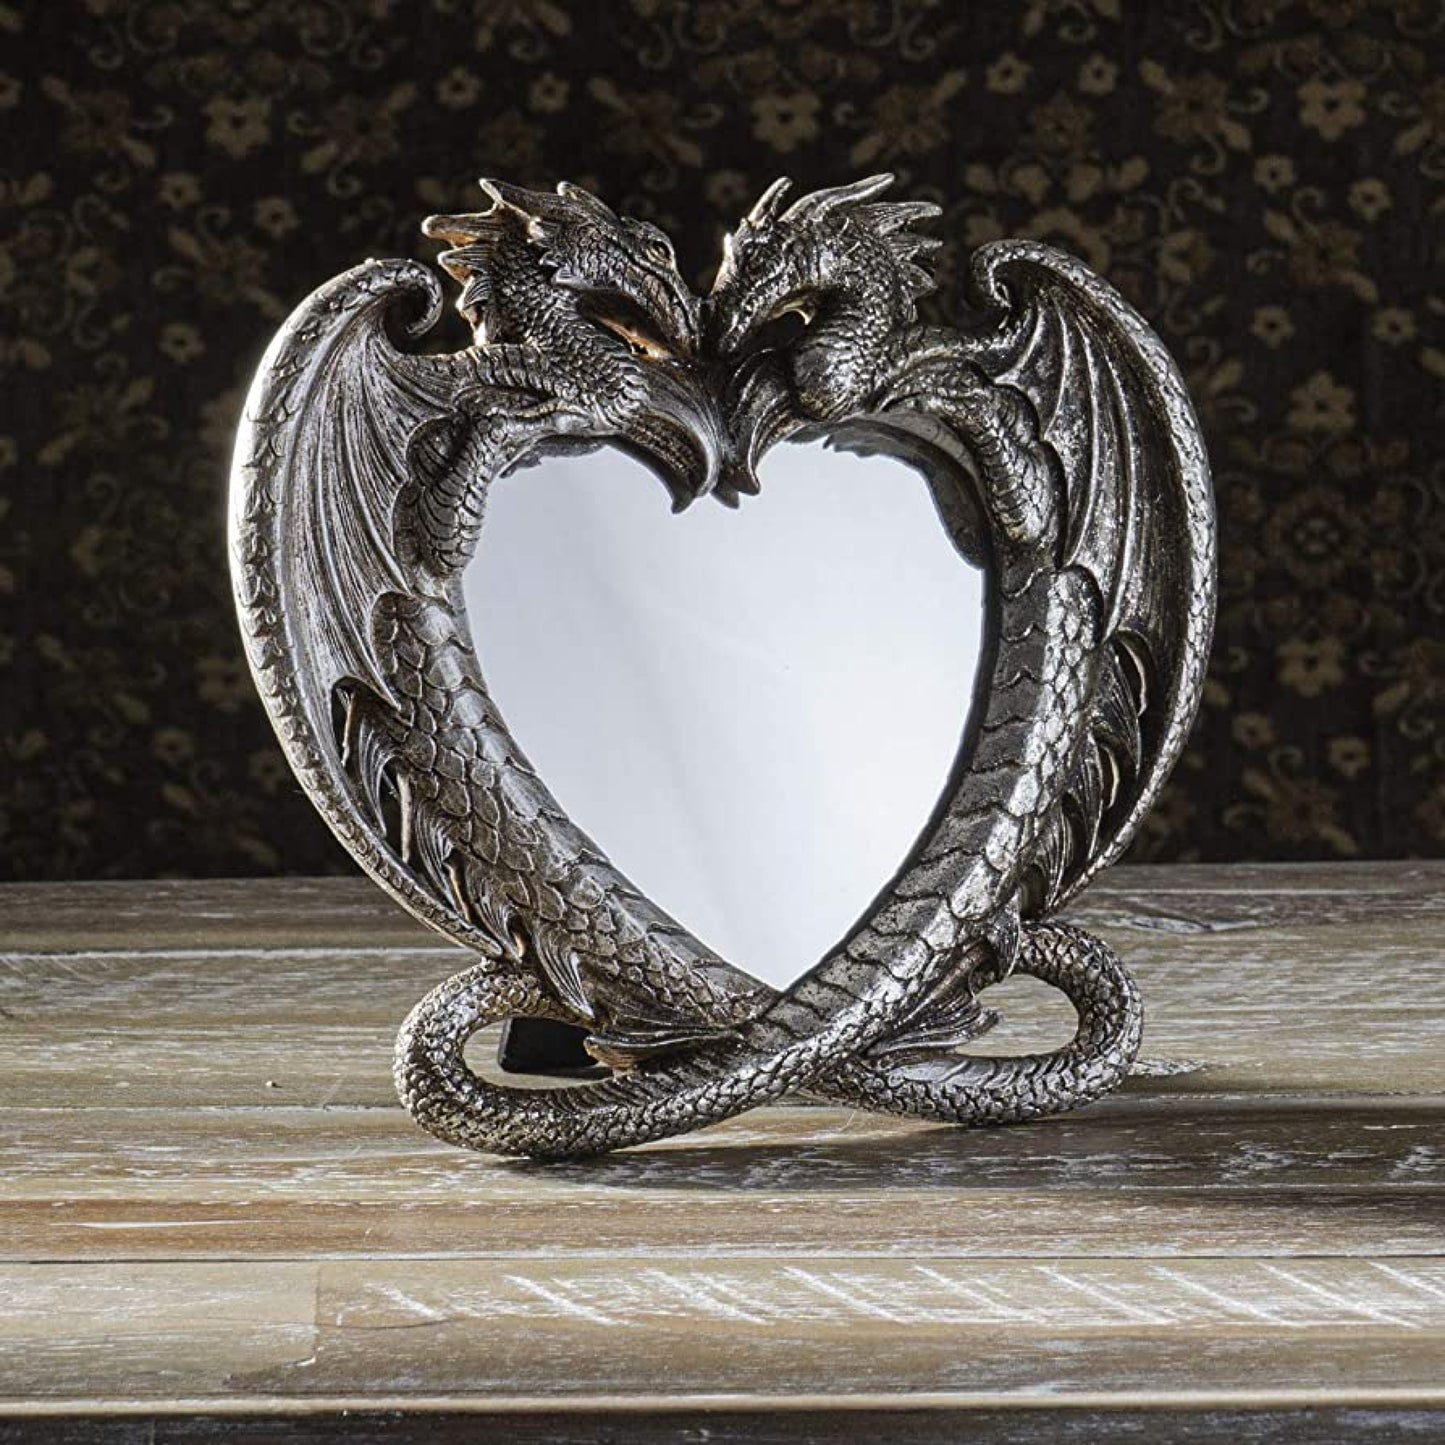 Conceived from primordial flames amidst the visions of the primeval divinities, this mirror has been summoned by fate to discover its ultimate soulmate.  An iconic symbol of adoration, this beautiful heart-shaped Dragon Mirror can be placed atop a surface or hung on a wall.  High quality resin hand finished in antique silver effect.